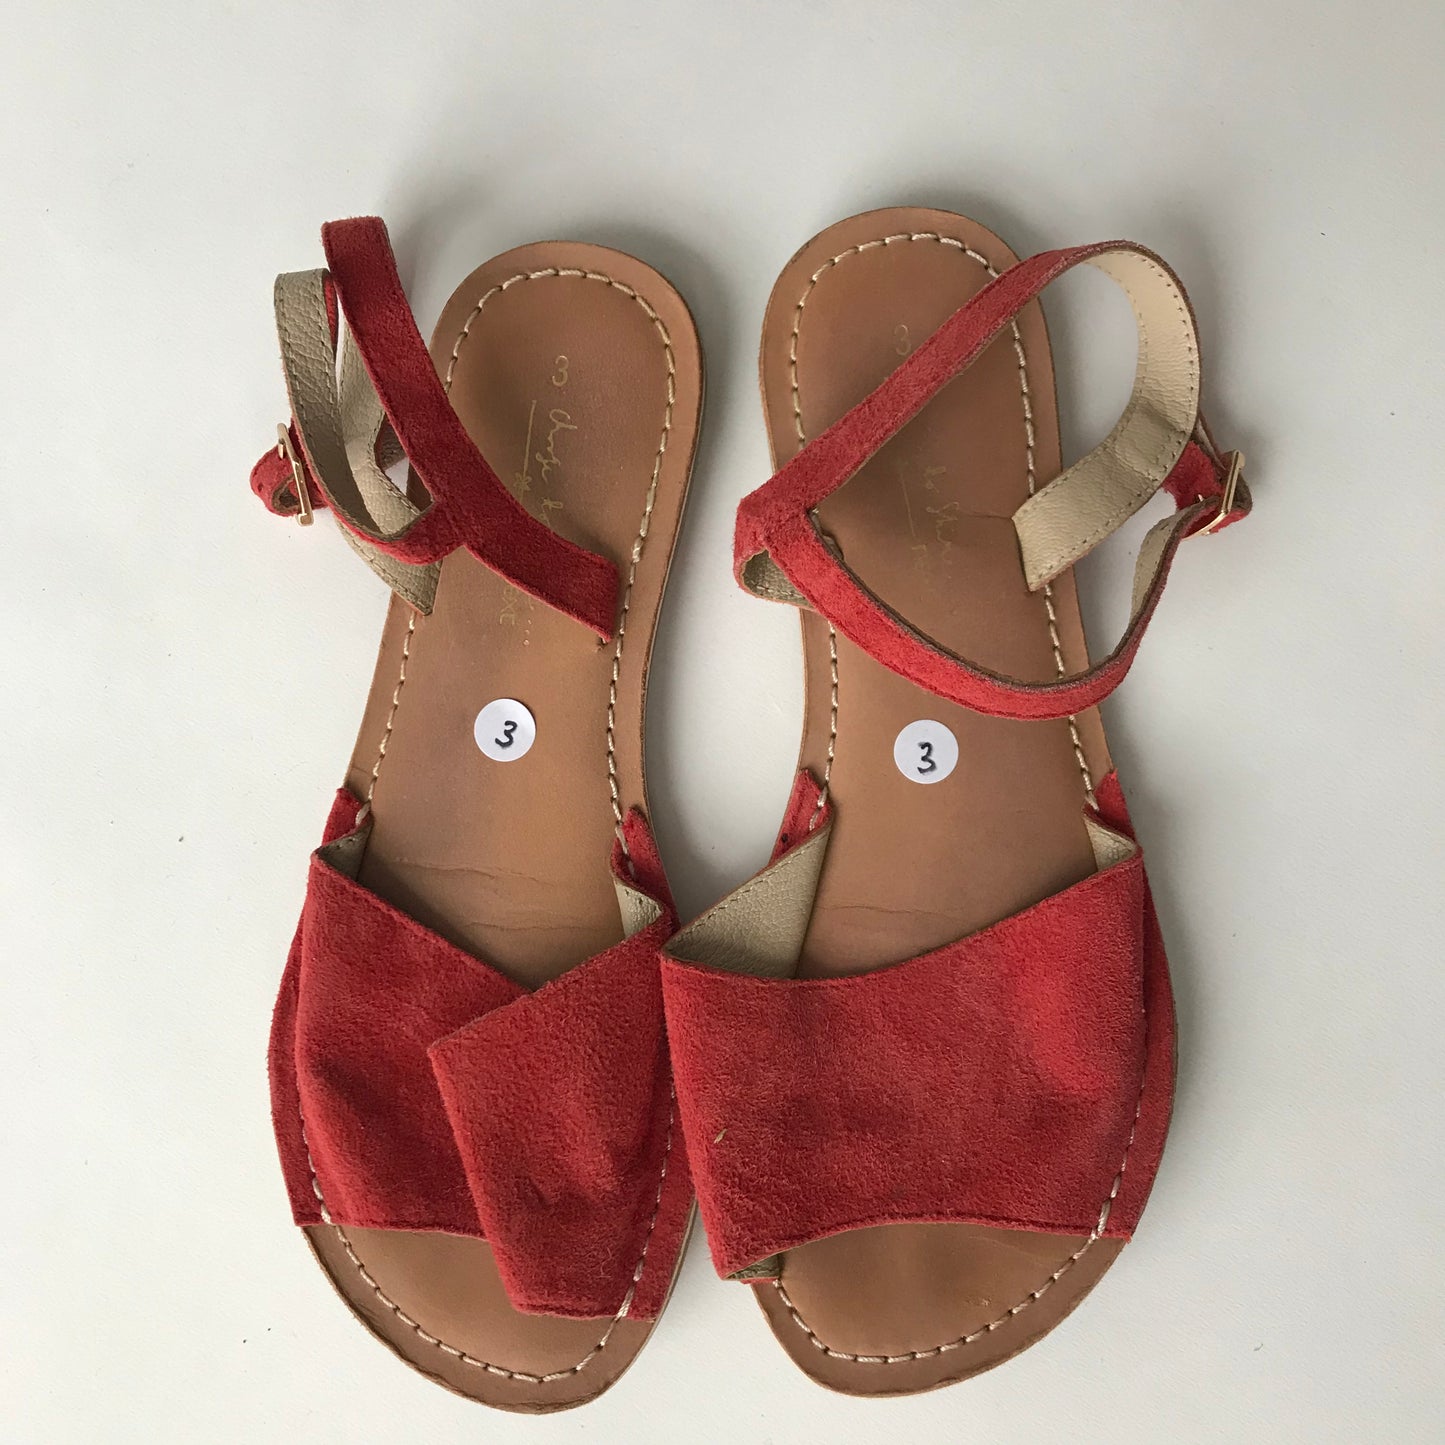 Sandals - Red Clay - Shoe Size 3